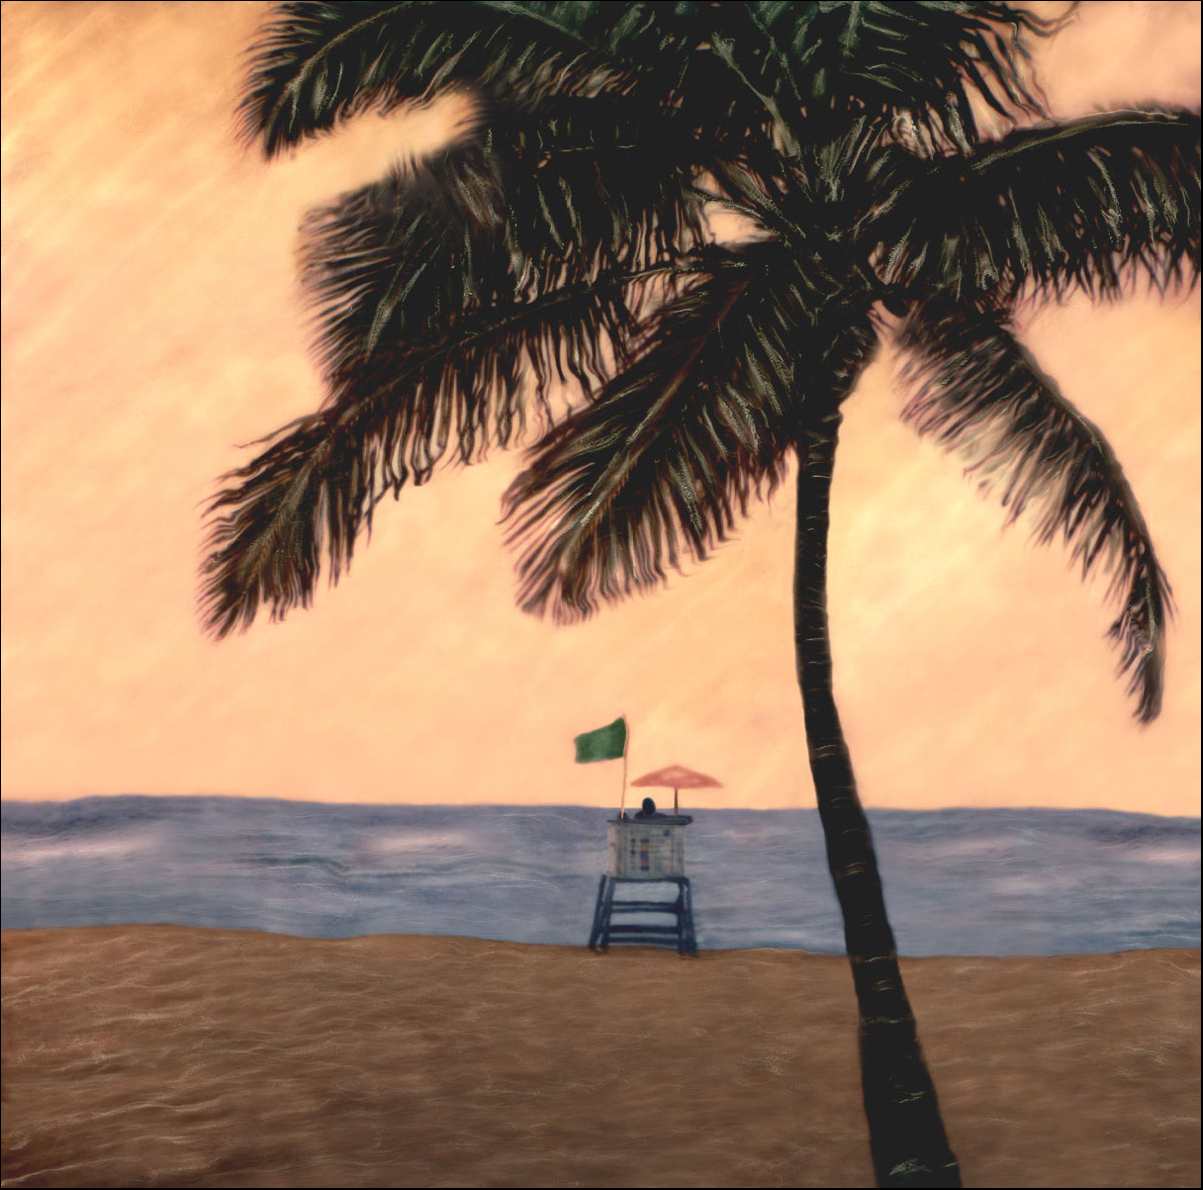 "Lifeguard Stand  and Palm Tree" <br> Pink Sky and Umbrella, Hollywood Beach, FL